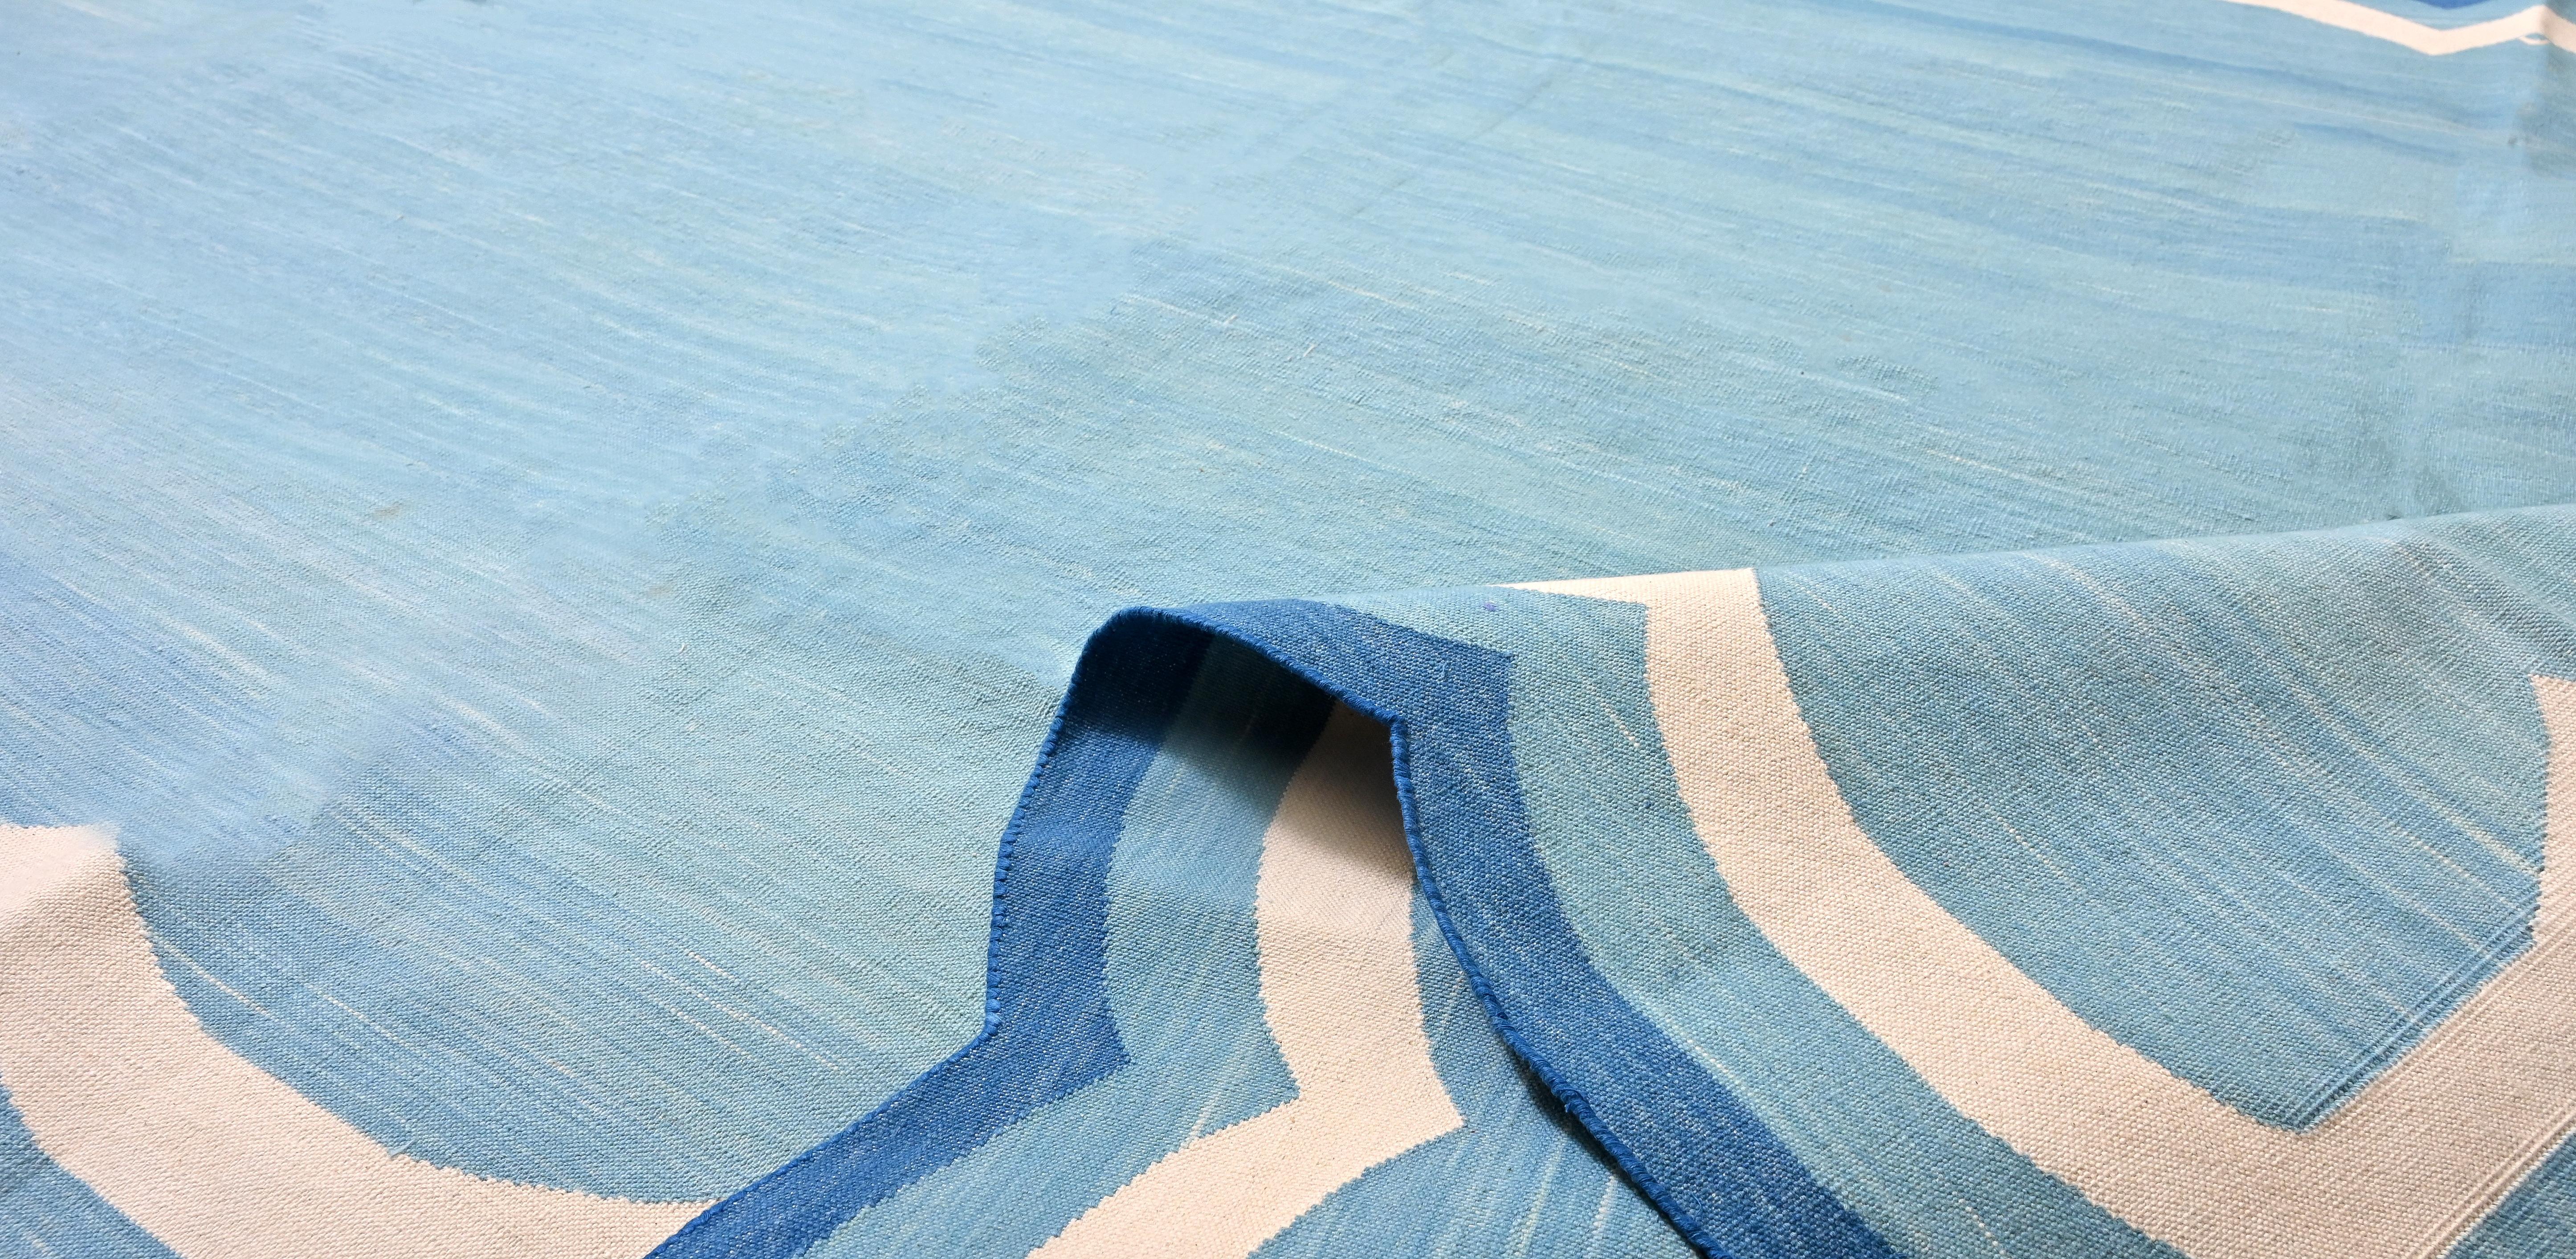 Cotton Vegetable Dyed Reversible Teal Blue And White Four Sided Scalloped Indian Rug - 5'x7'
These special flat-weave dhurries are hand-woven with 15 ply 100% cotton yarn. Due to the special manufacturing techniques used to create our rugs, the size